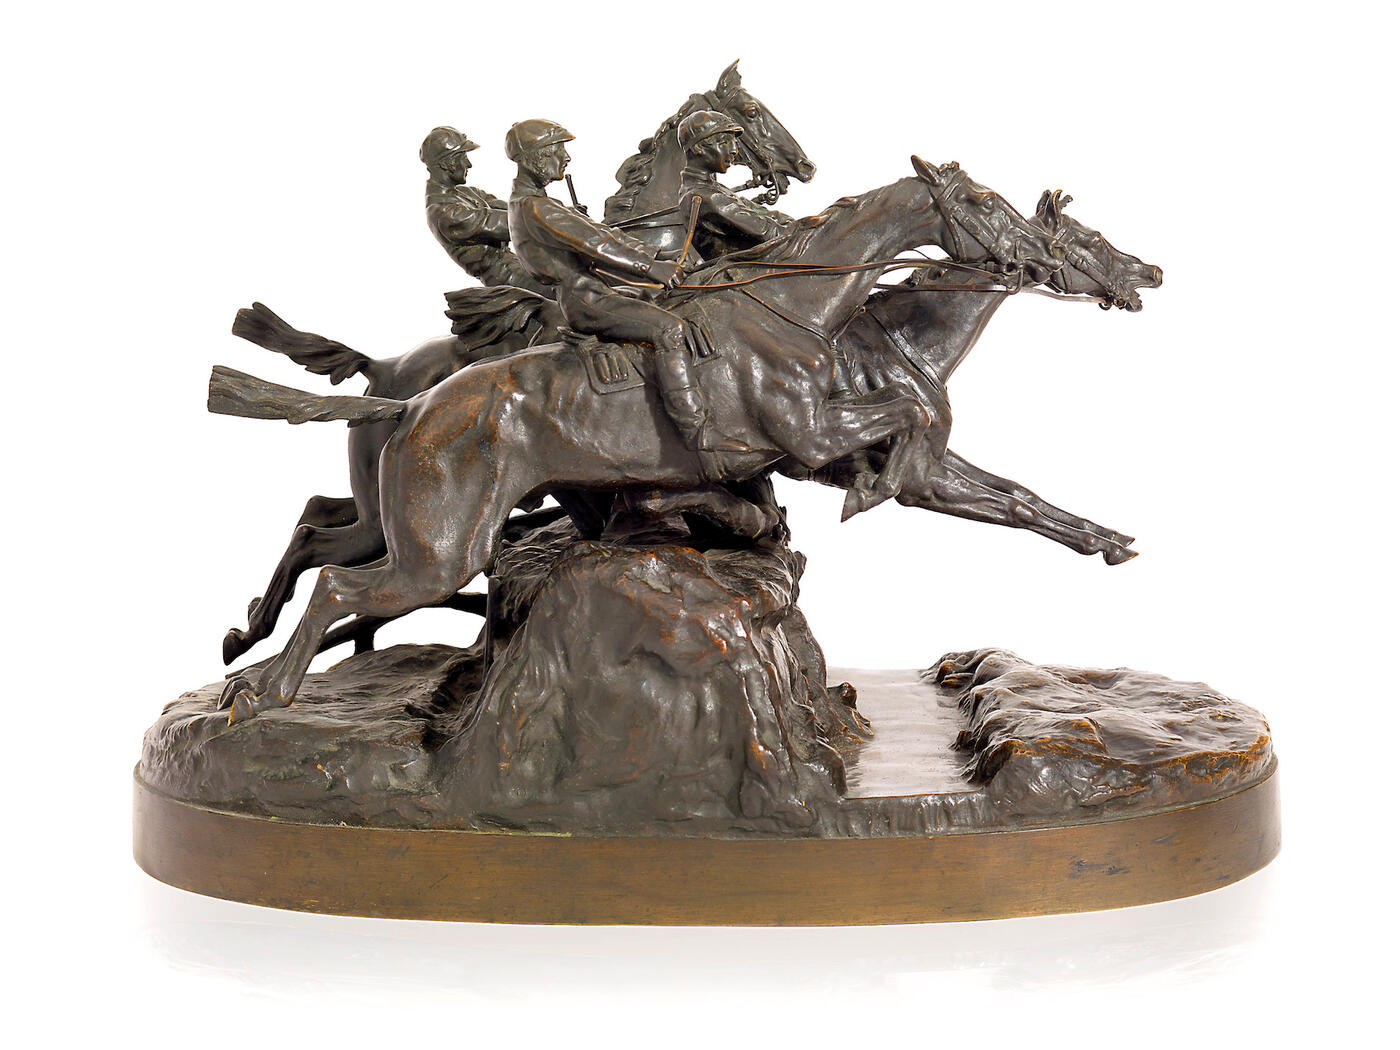 A Russian Equestrian Composition "Steeplechase"